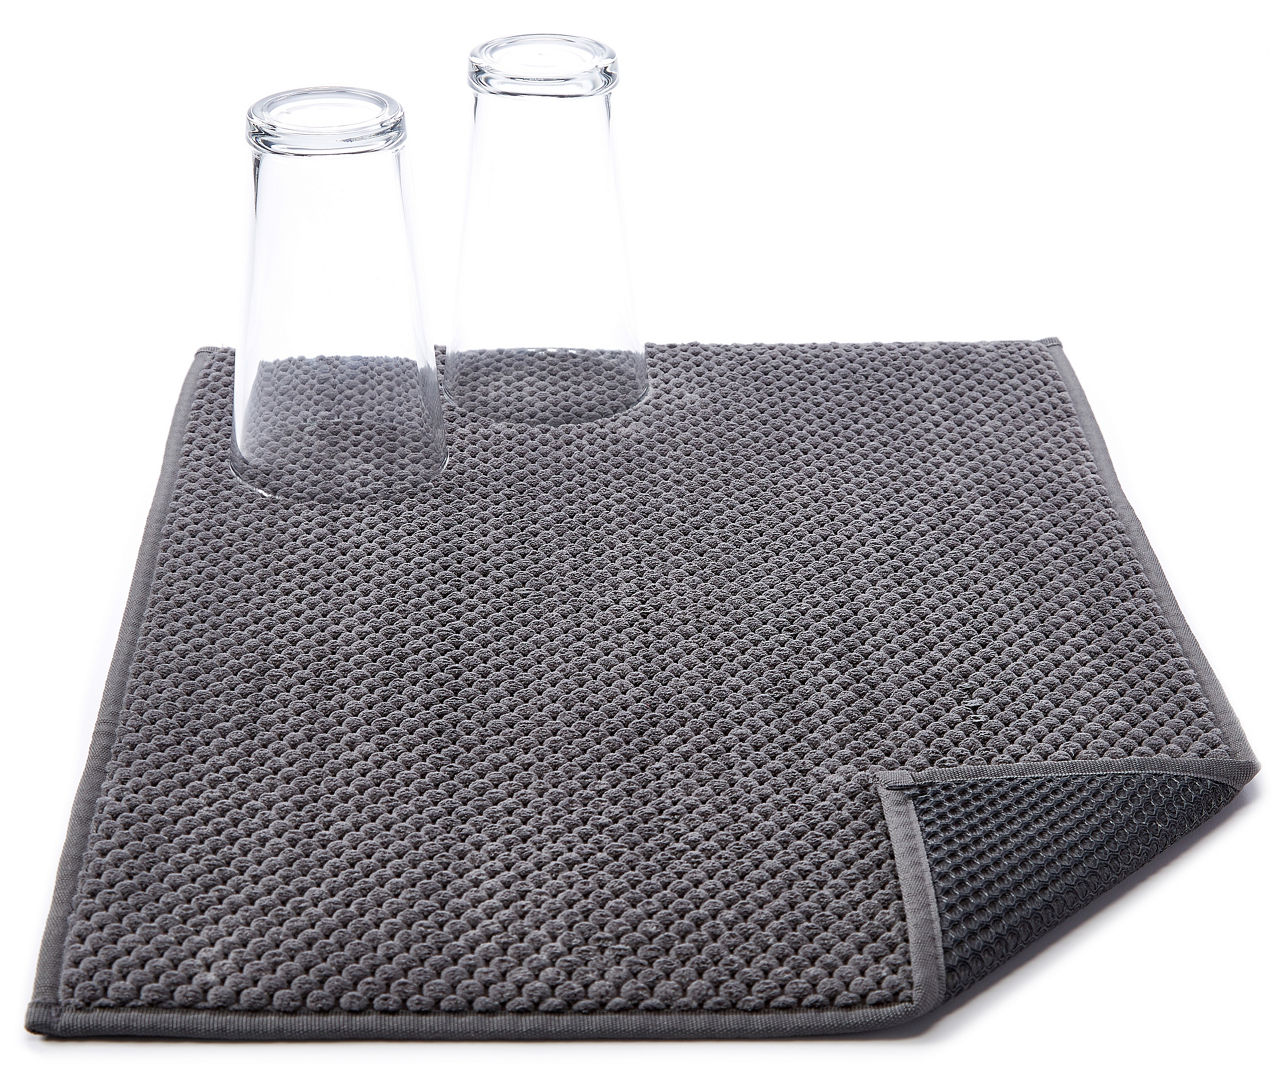 I've Tried Dozens of Dish Drying Mats, and This Is the Only One That Hasn't  Gotten Grimy